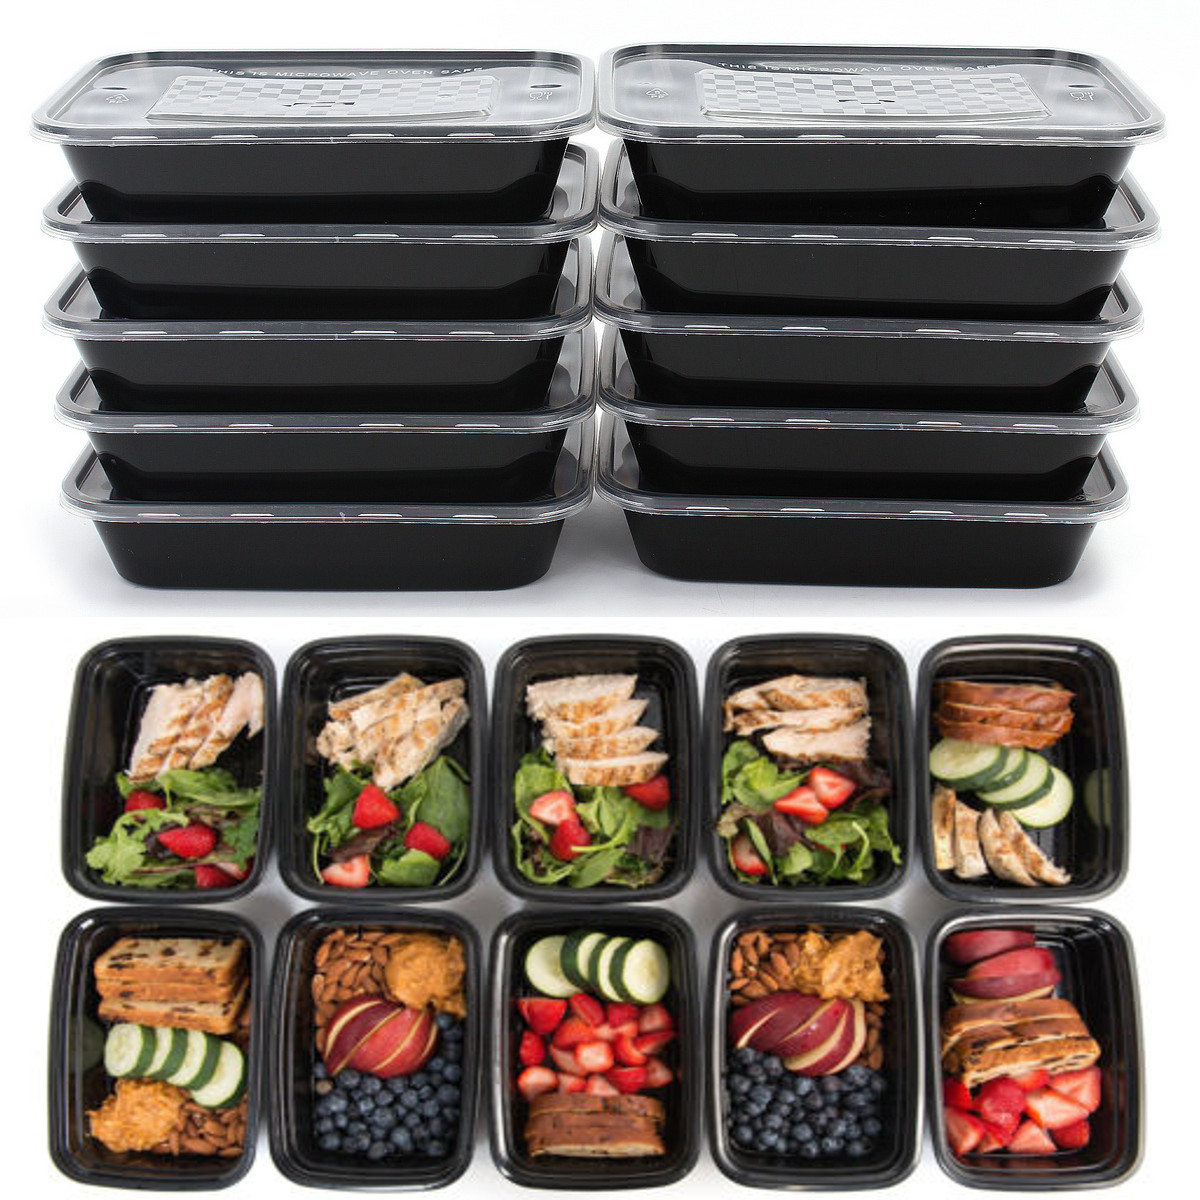 

10Pcs Meal Prep Food Containers with Lids Reusable Microwavable Plastic Lunch Box 16oz